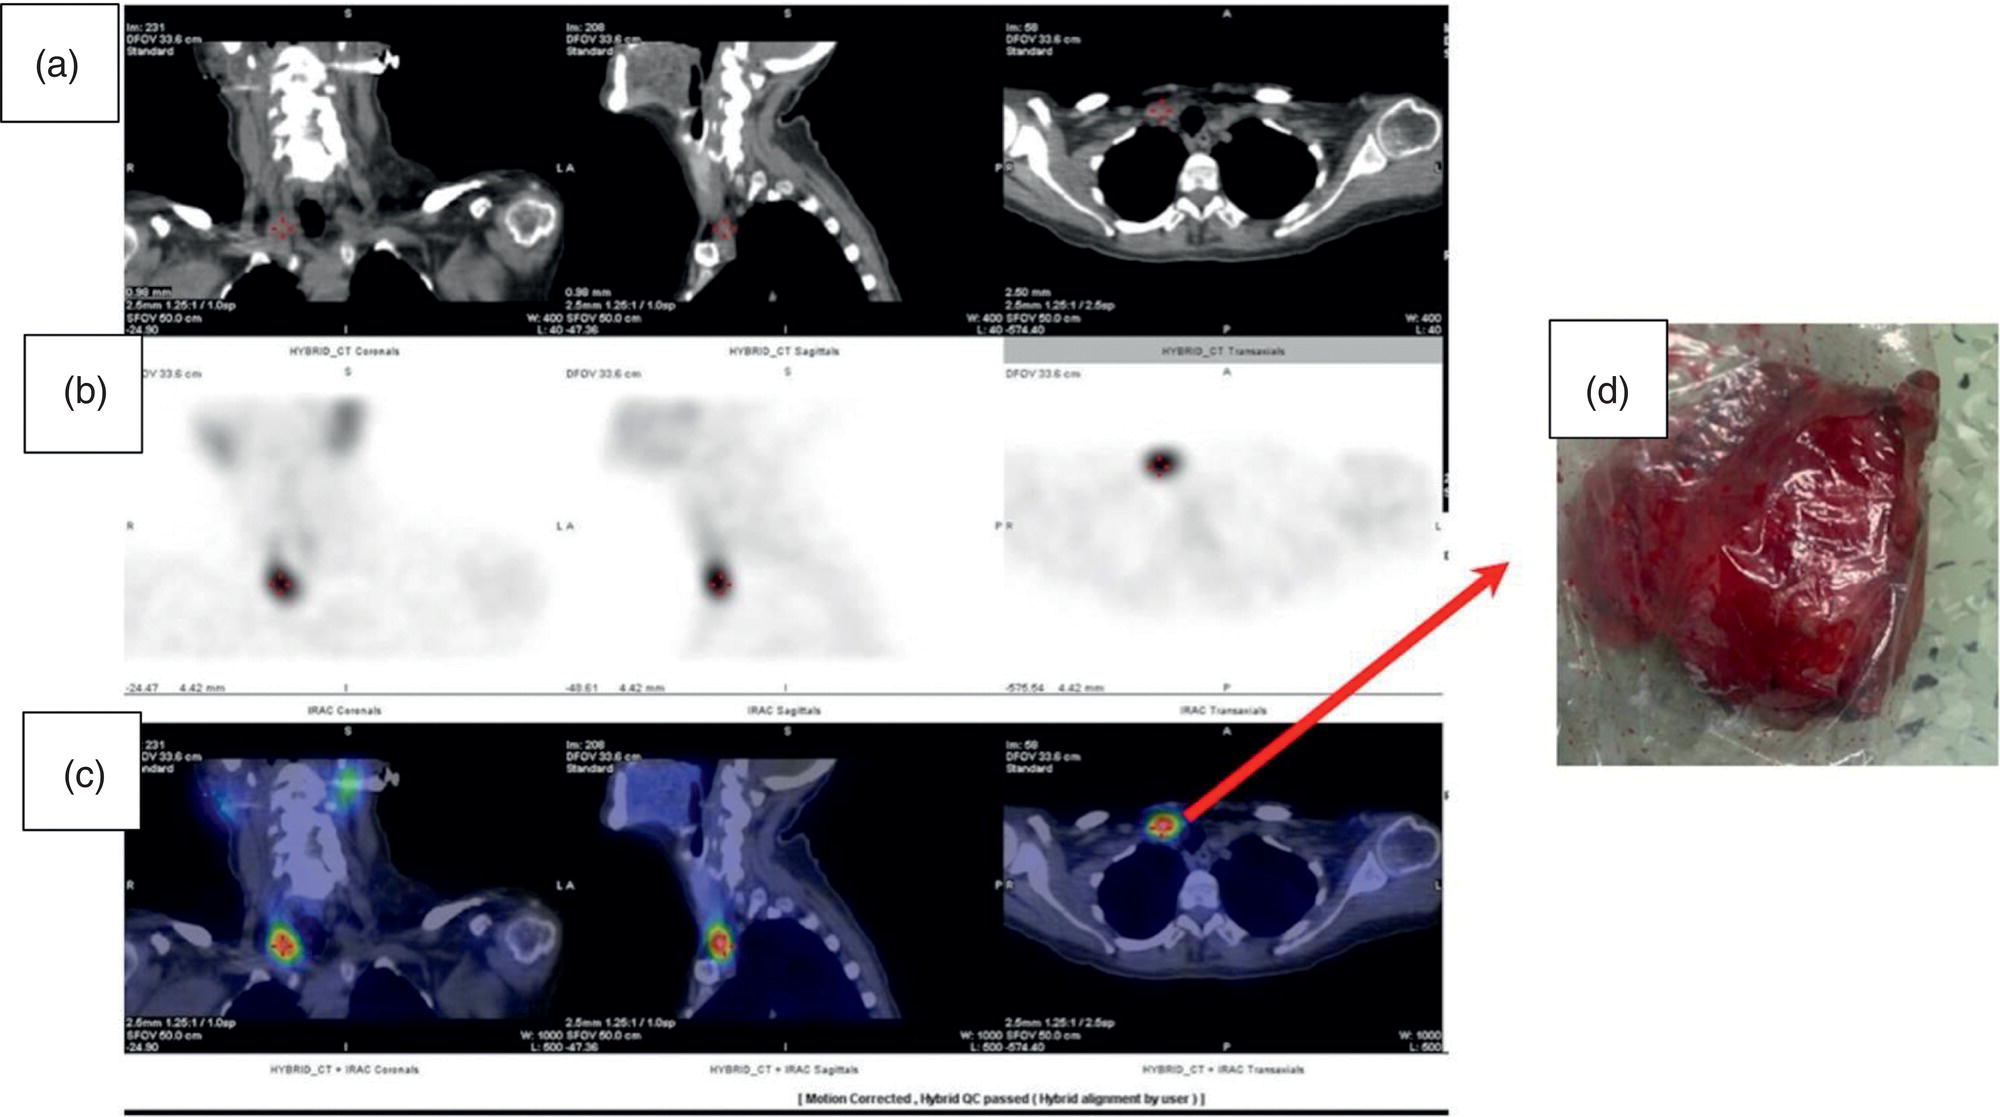 Schematic illustration of 99mTc-MIBI SPECT/CT, coronal, sagittal, and axial views (a, CT; b, nuclear SPECT; c, fused SPECT/CT), showing a macroadenoma of the right inferior parathyroid (red arrow) confirmed by the surgical specimen (d).